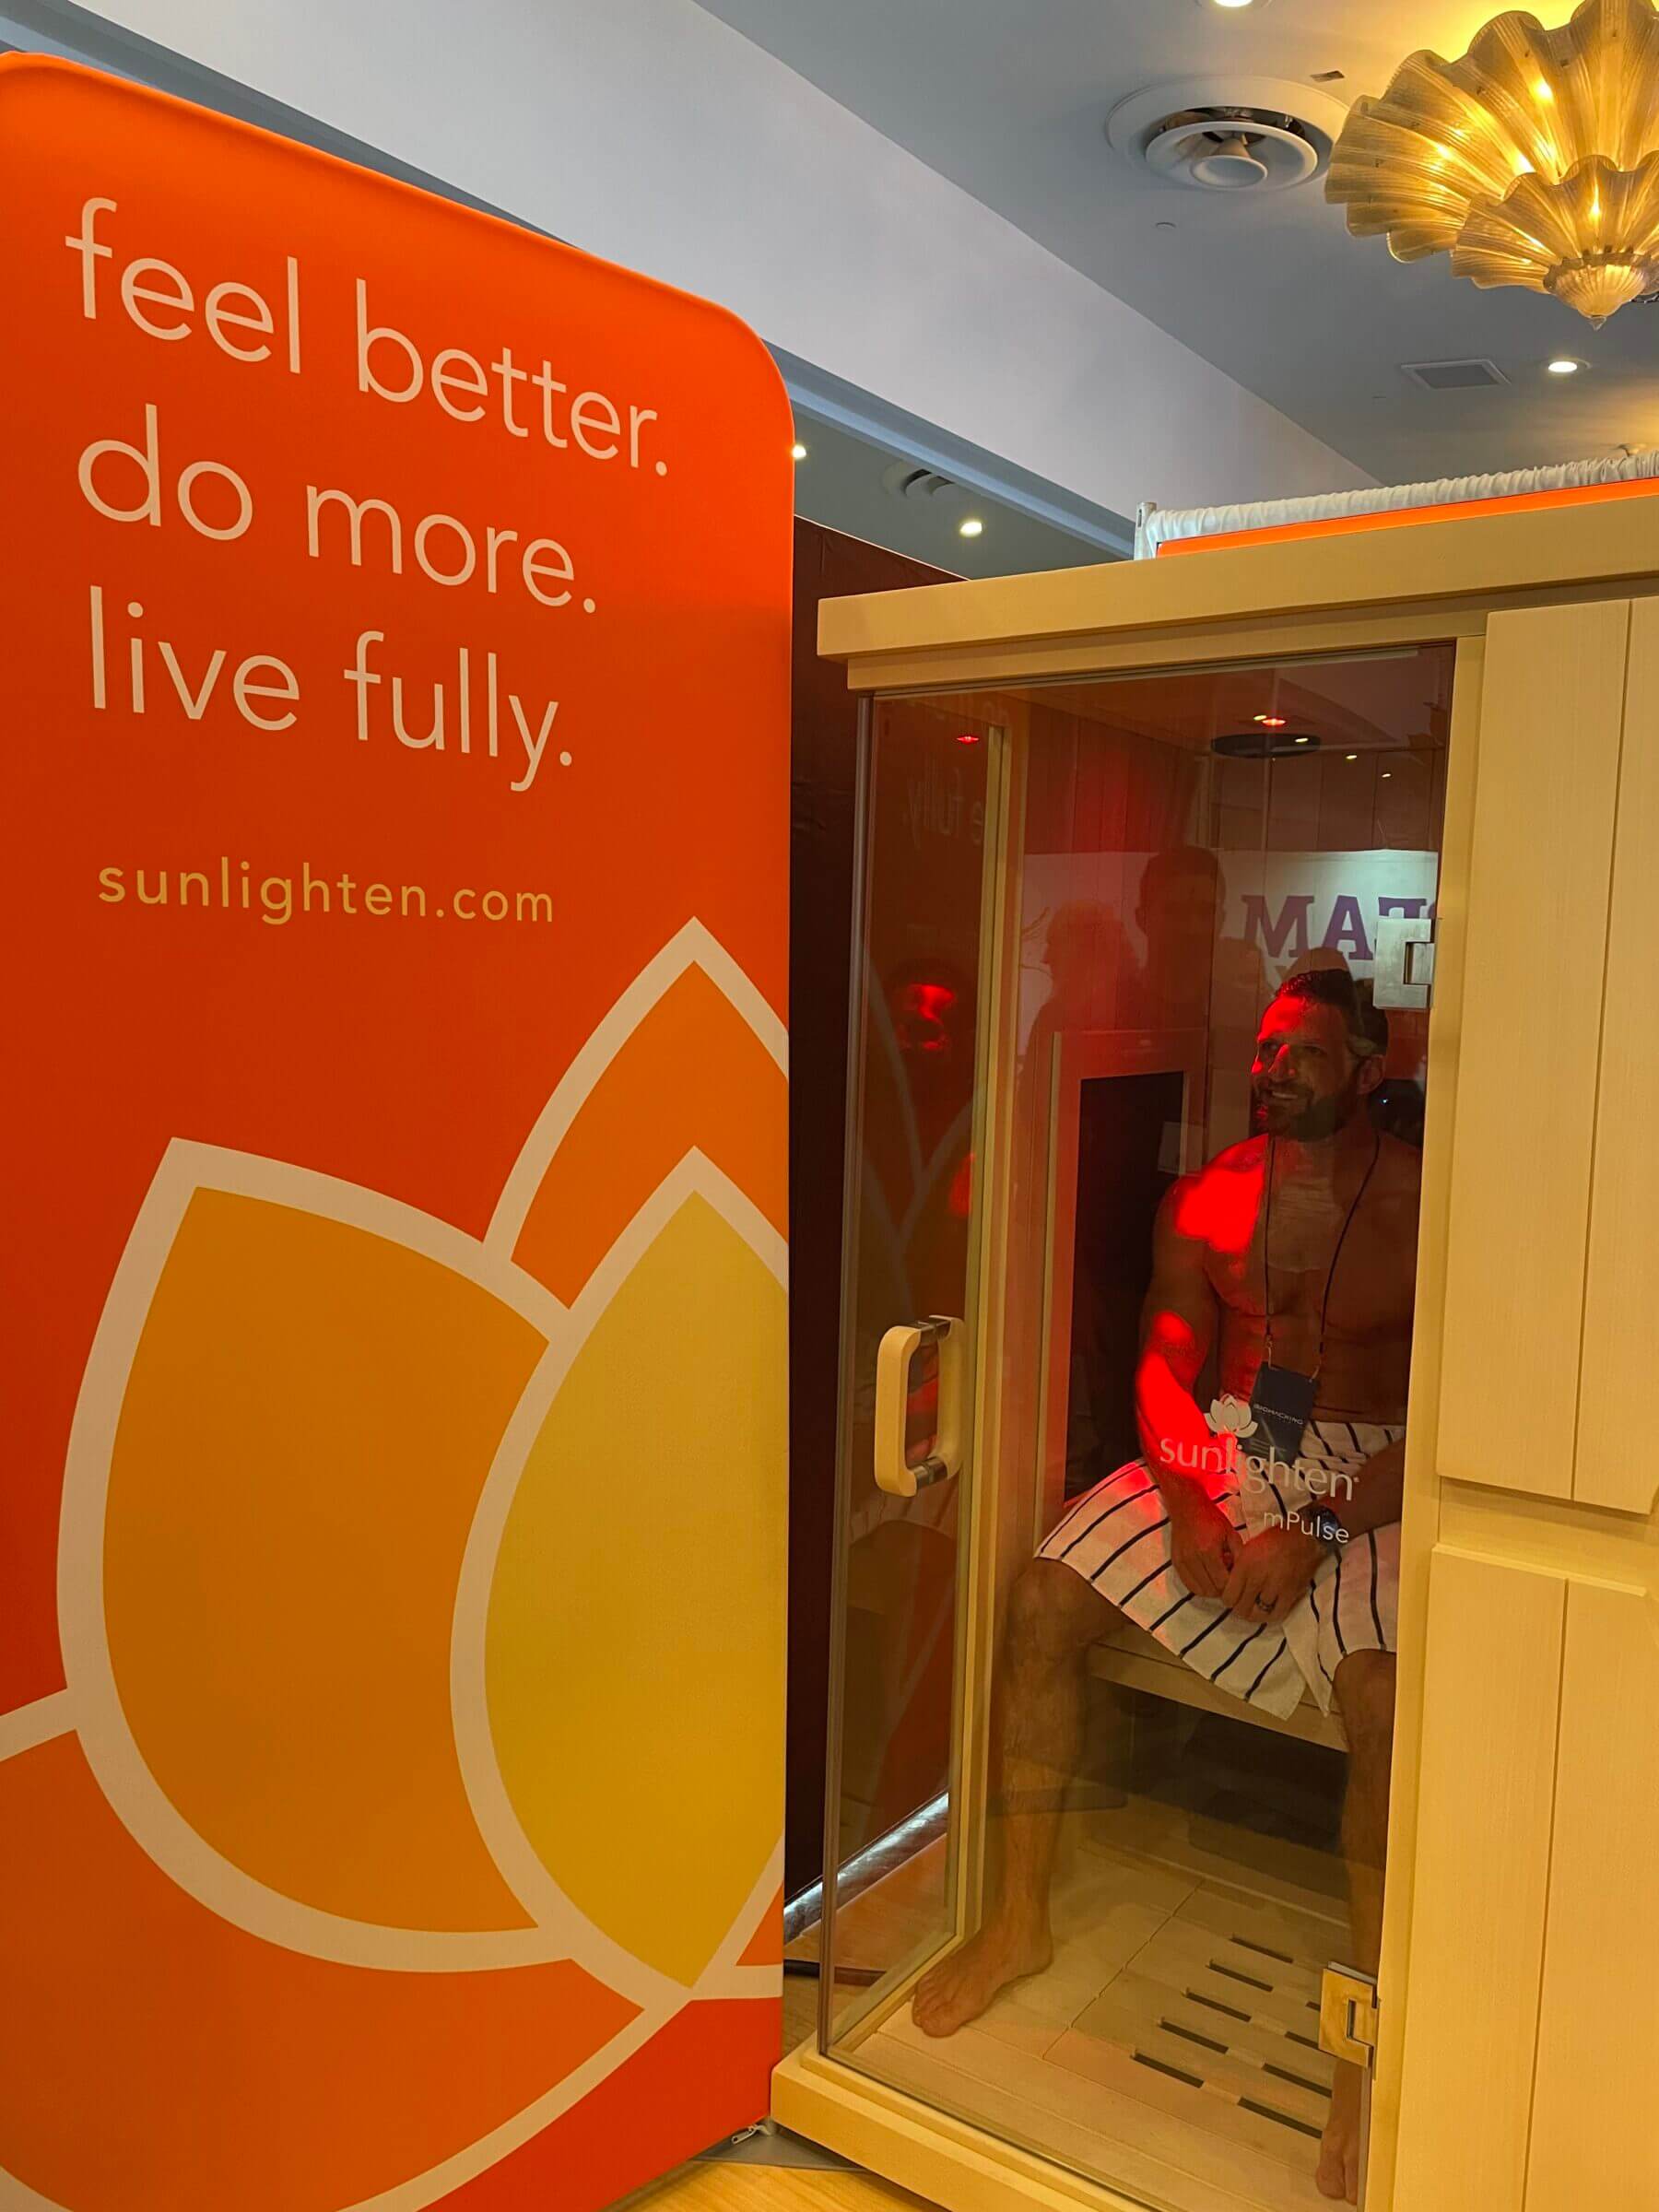 My first exposure to Sunlighten was at a biohacking conference